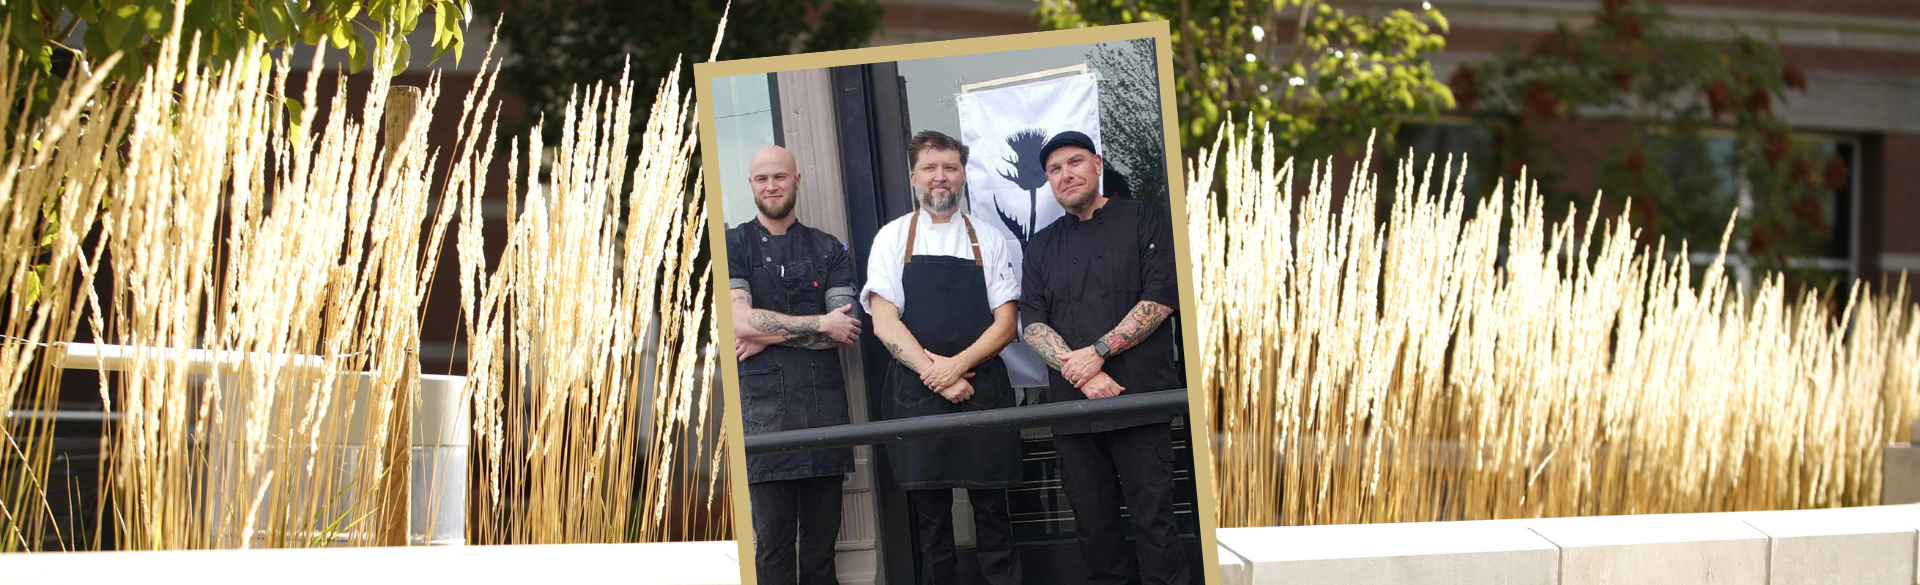 framed image of three men in aprons standing with arms crossed, overlaid on image of ornamental grasses